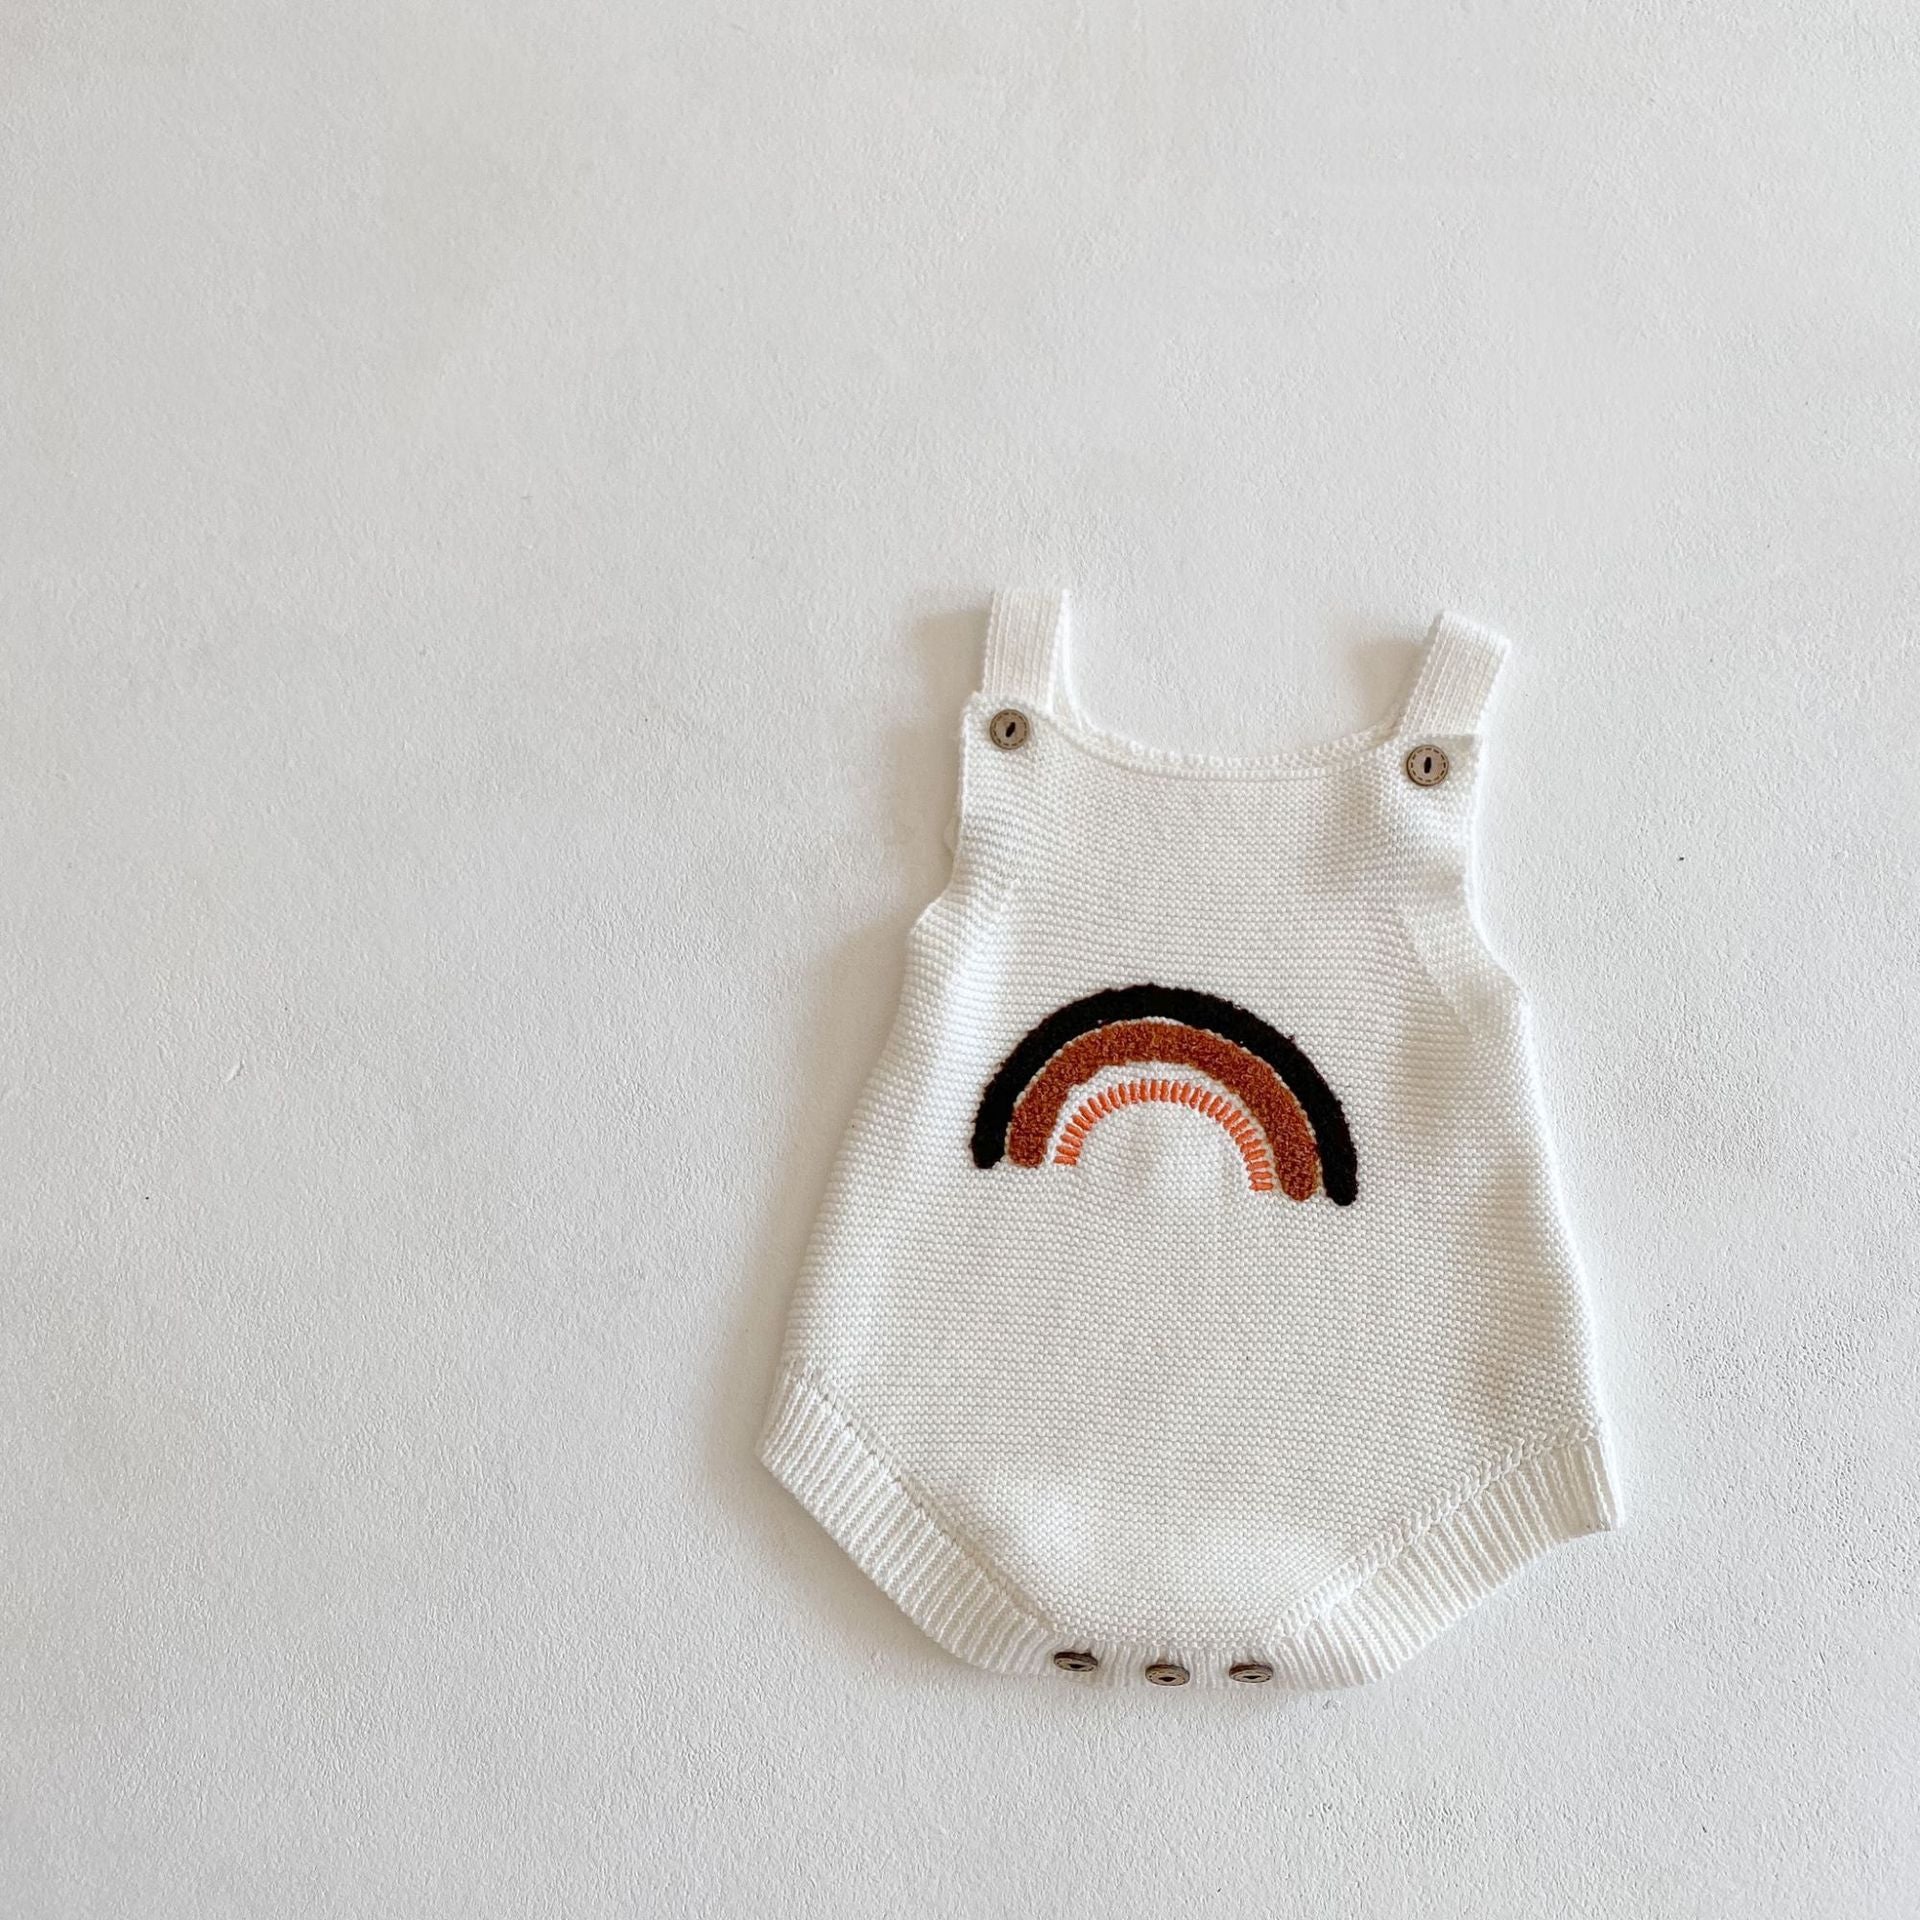 【BABY】虹刺繍ニットロンパース🌈